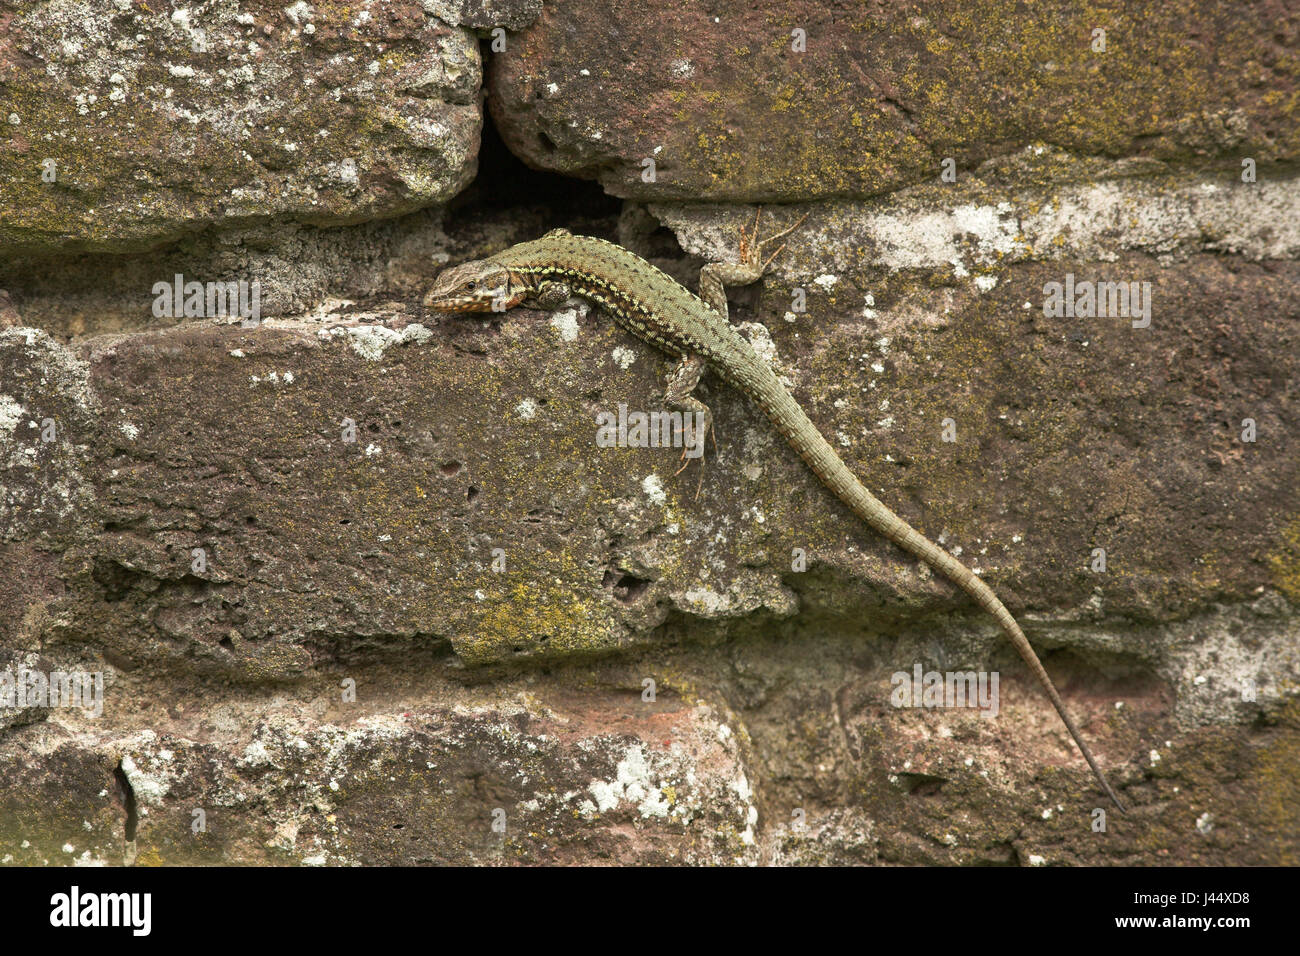 a wall lizard is basking in a hole in the wall Stock Photo